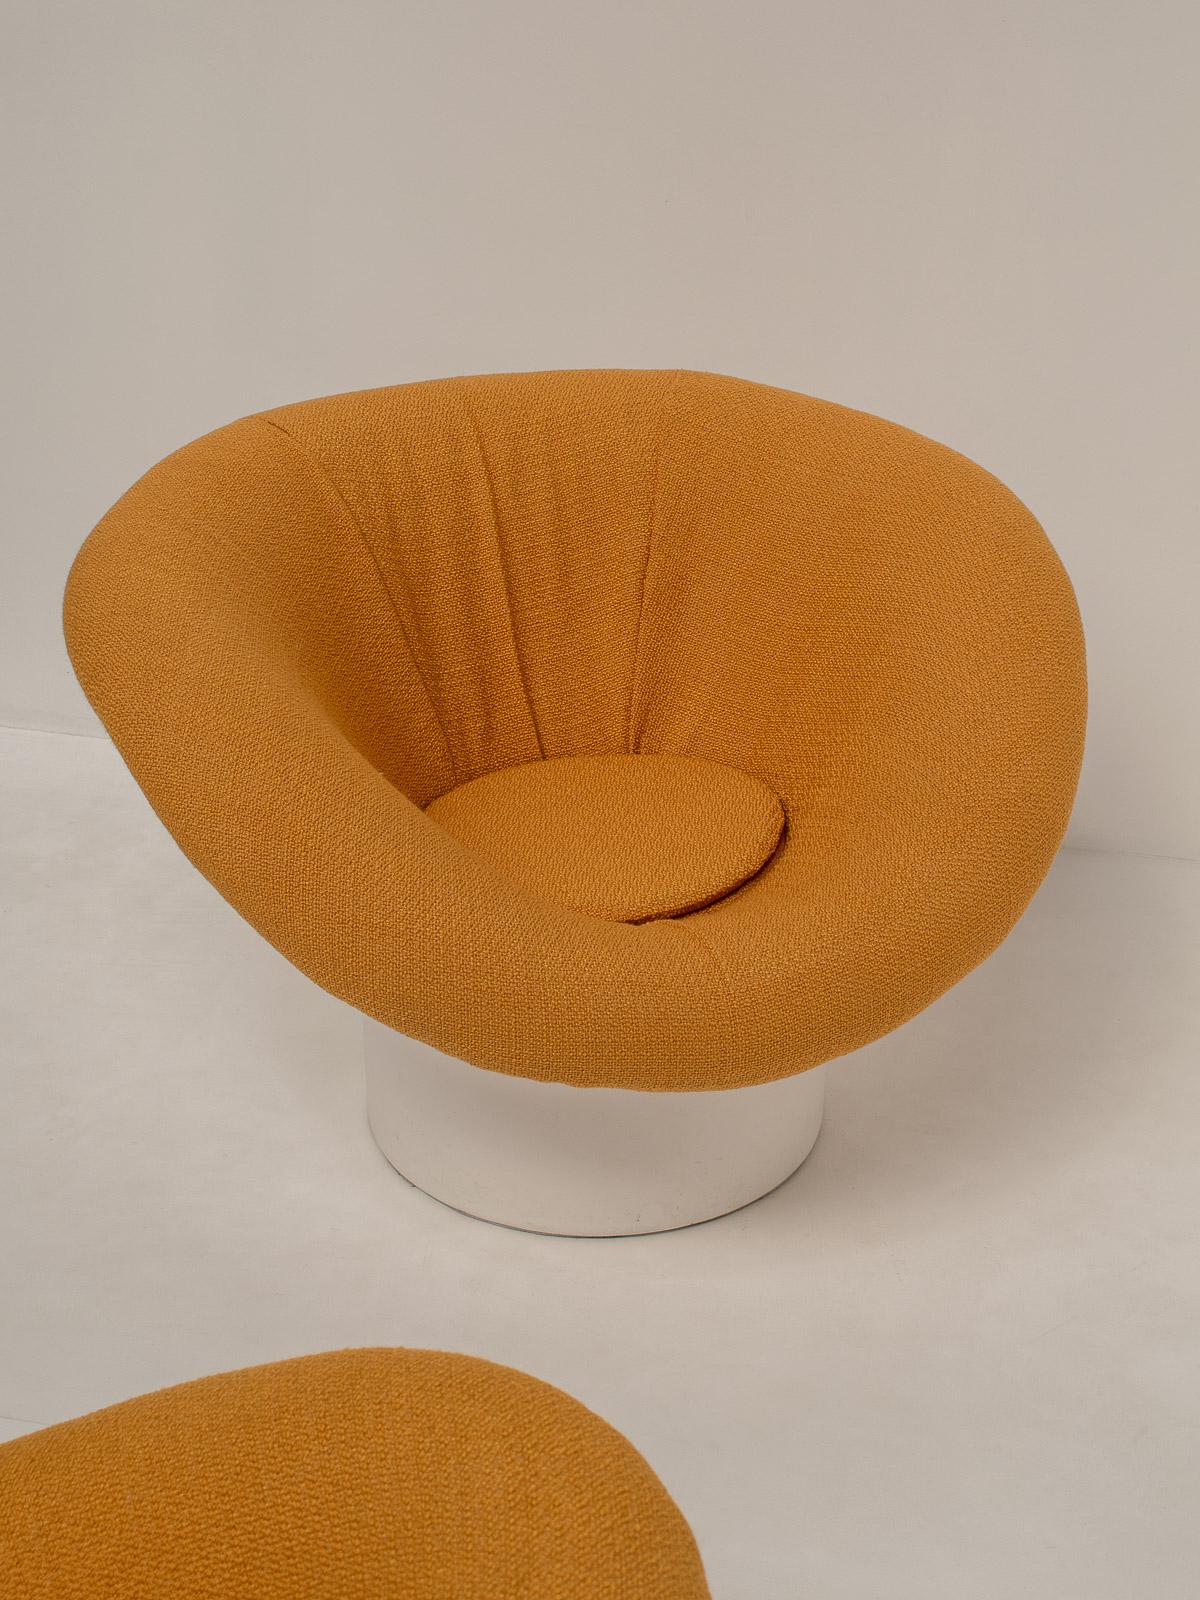 Fabric Pair of Krokus Lounge Chairs by Lennart Bender for Ulferts, Sweden 1960s For Sale